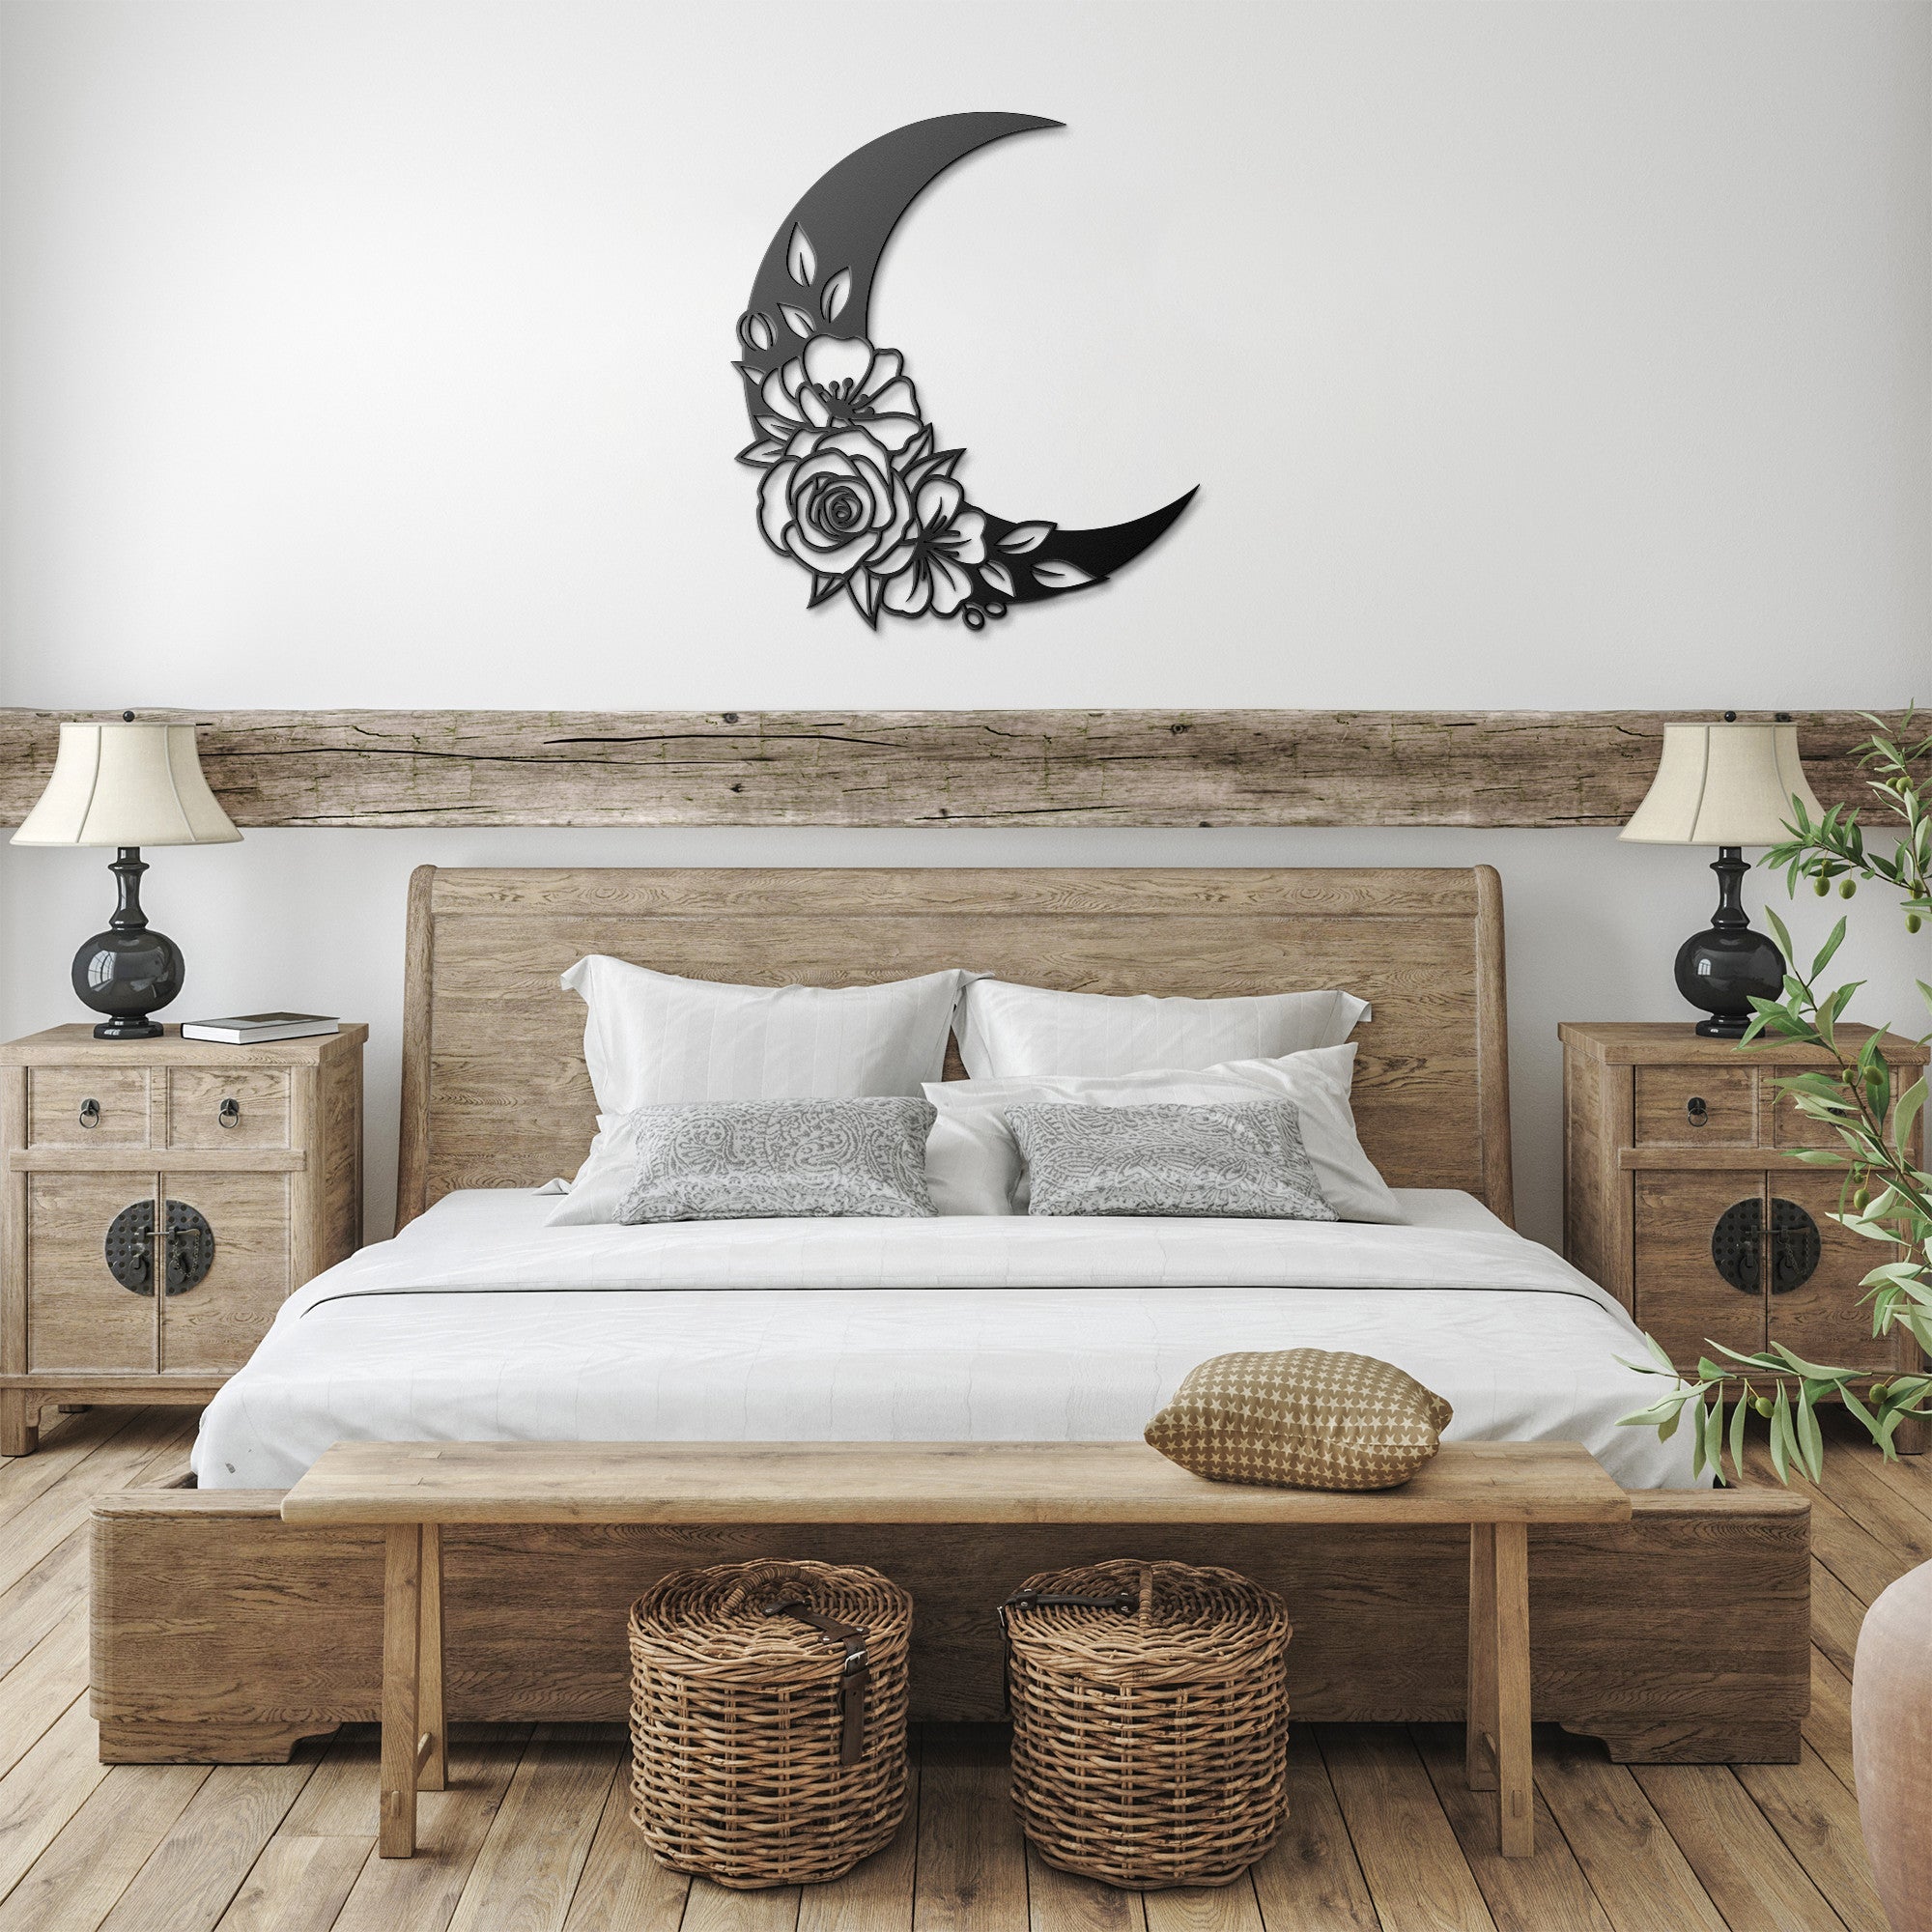 Daises Floral Moon Sign - Cool Metal Signs